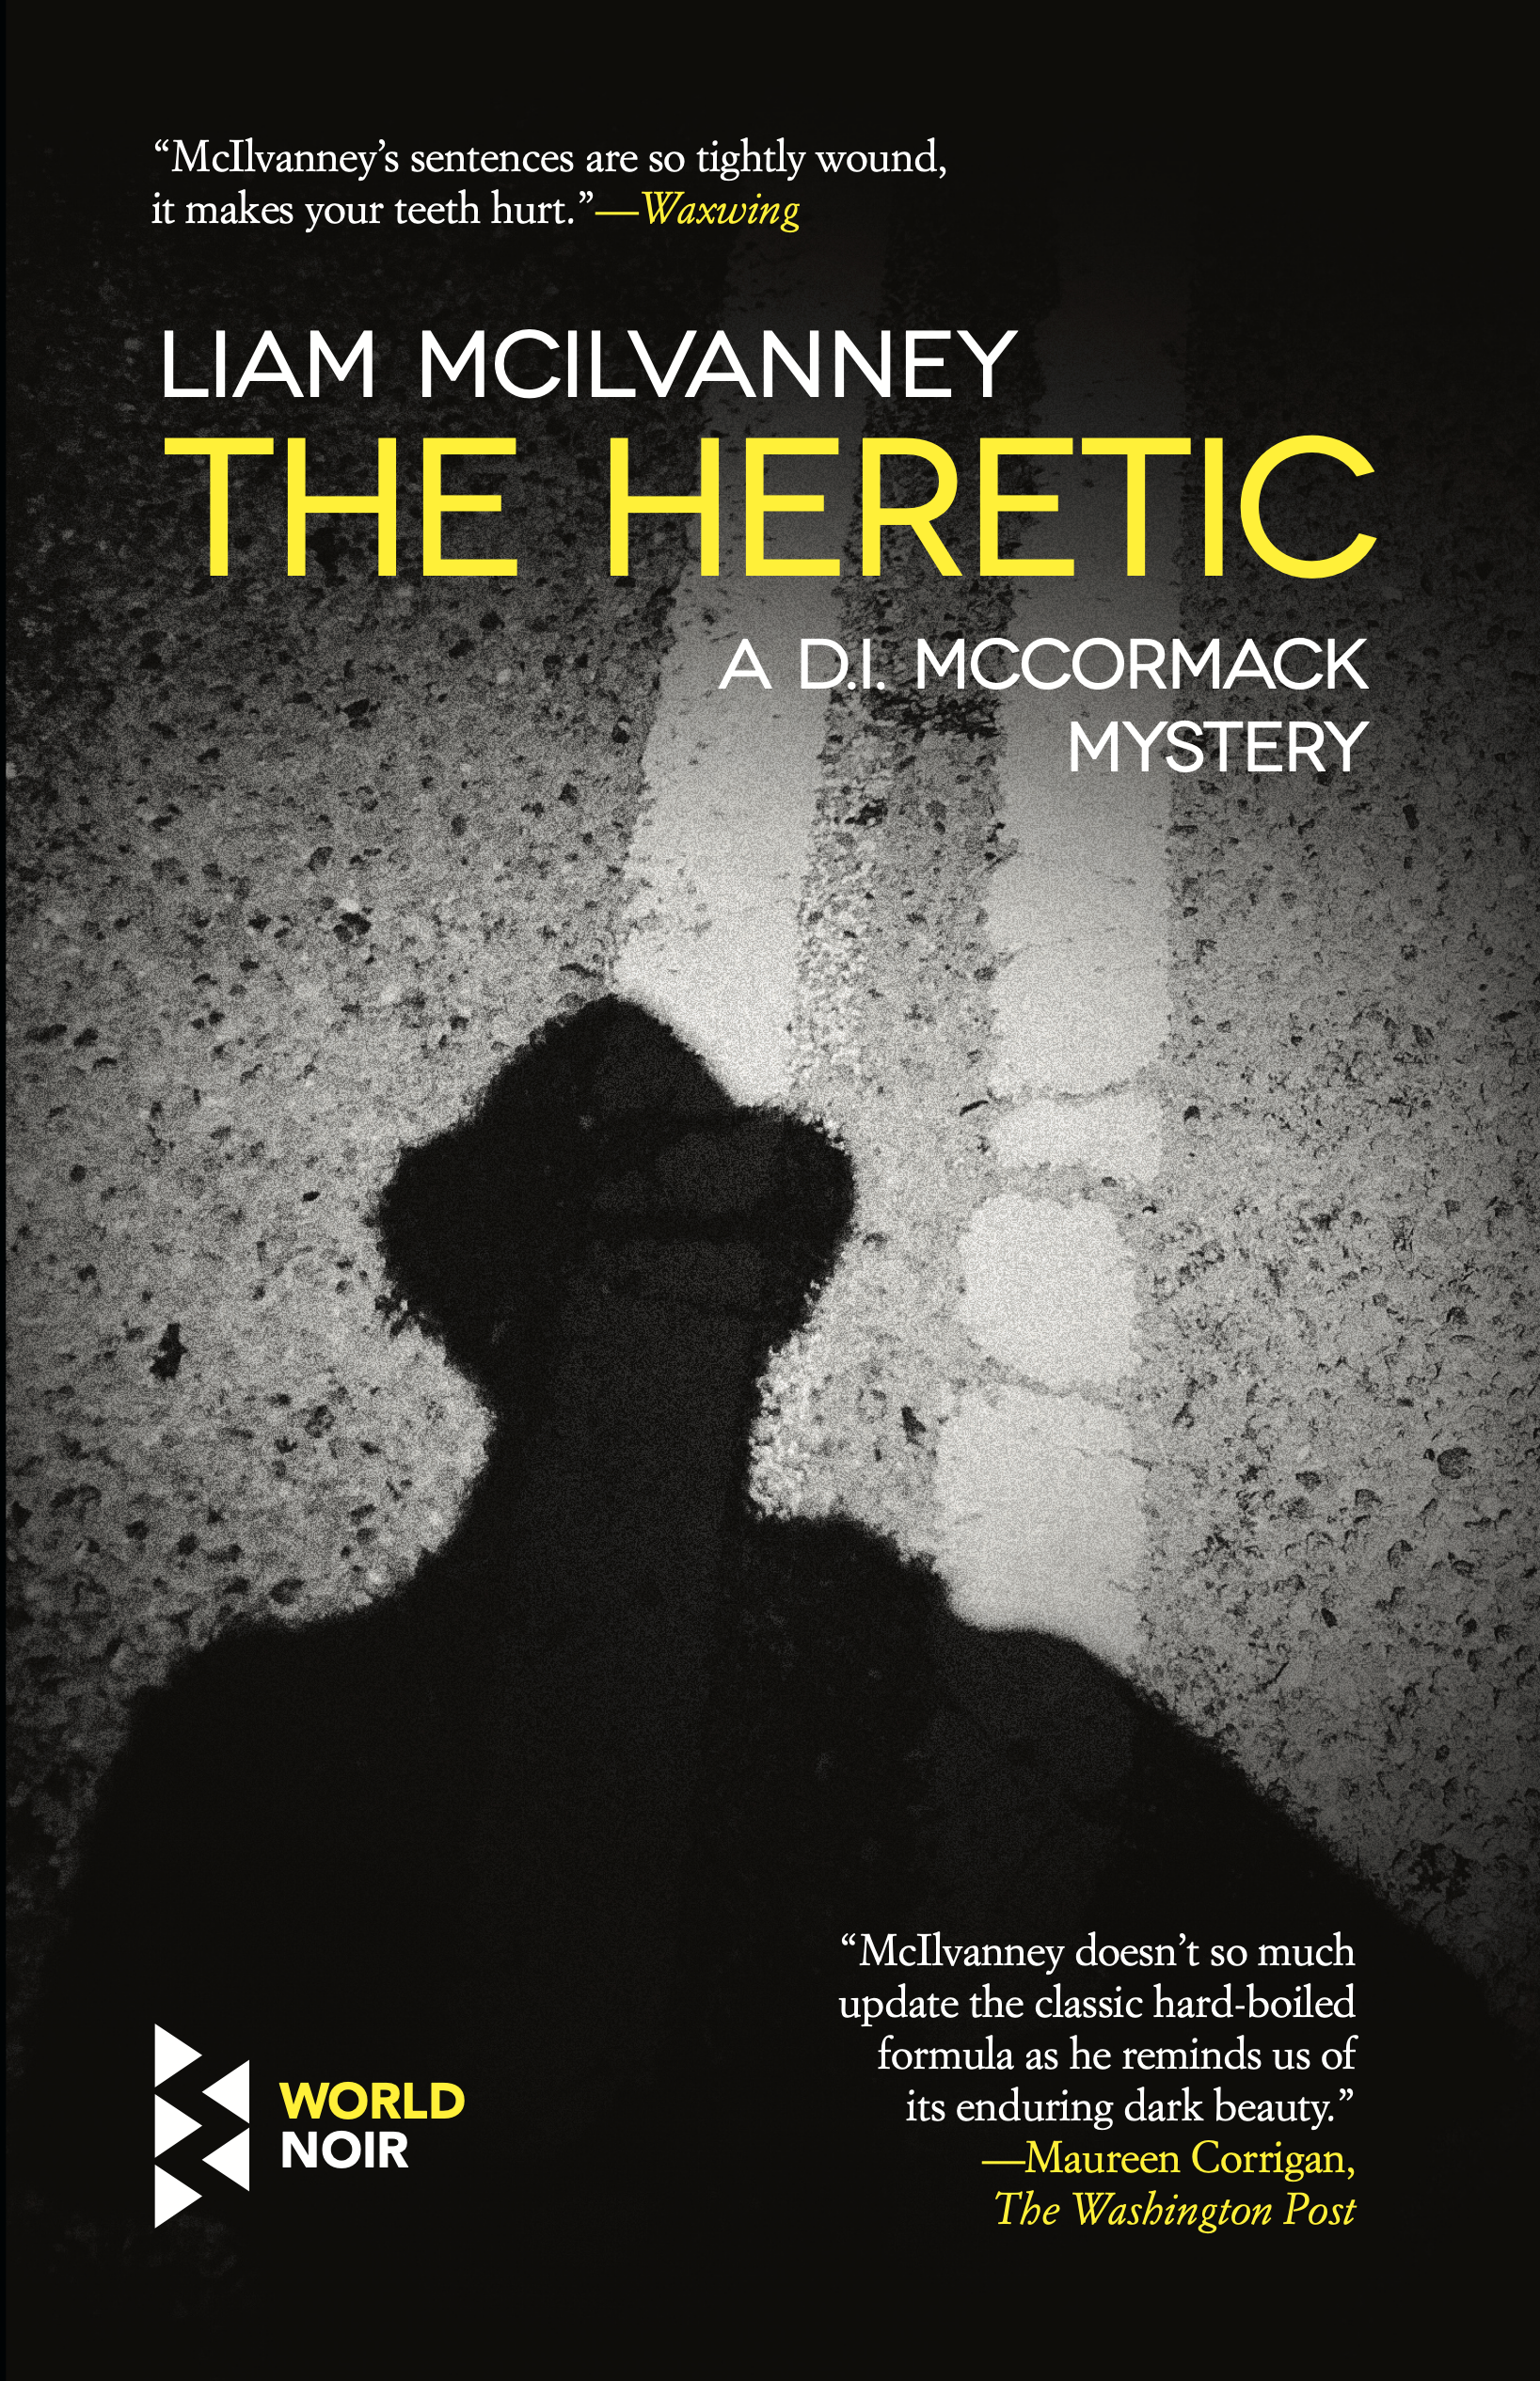 Liam McIlvanney's THE HERETIC book cover